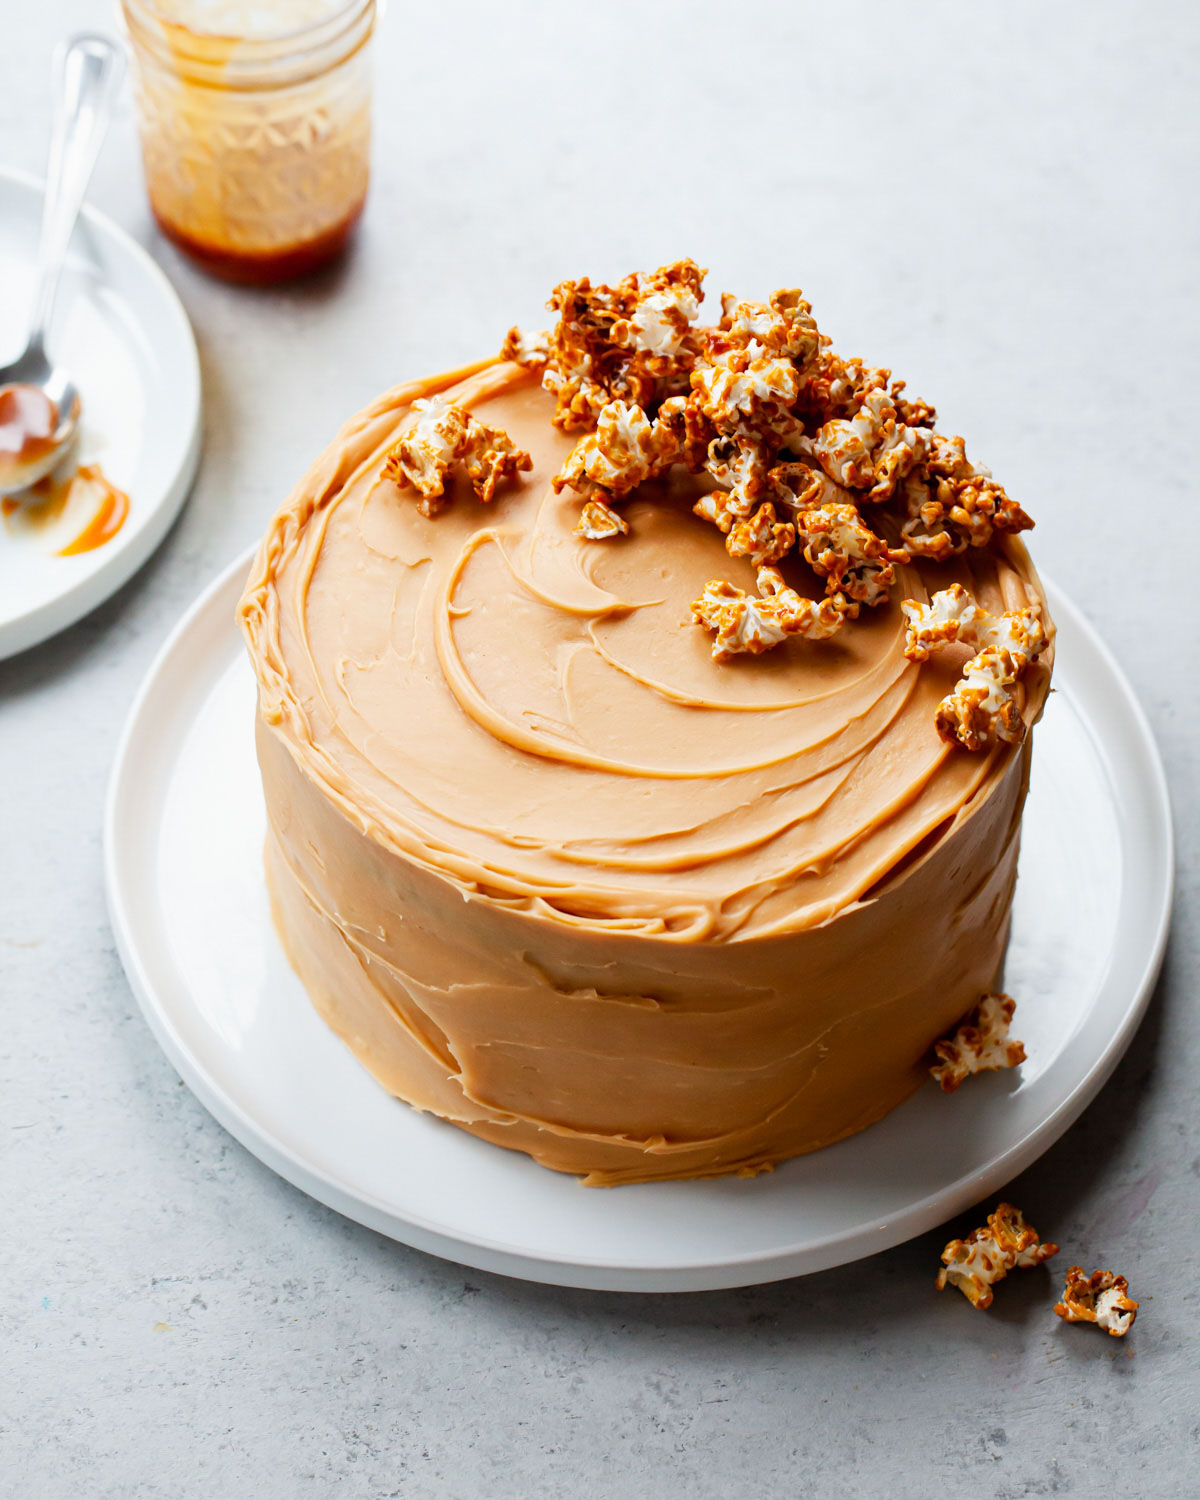 A caramel frosted cake with caramel popcorn on top